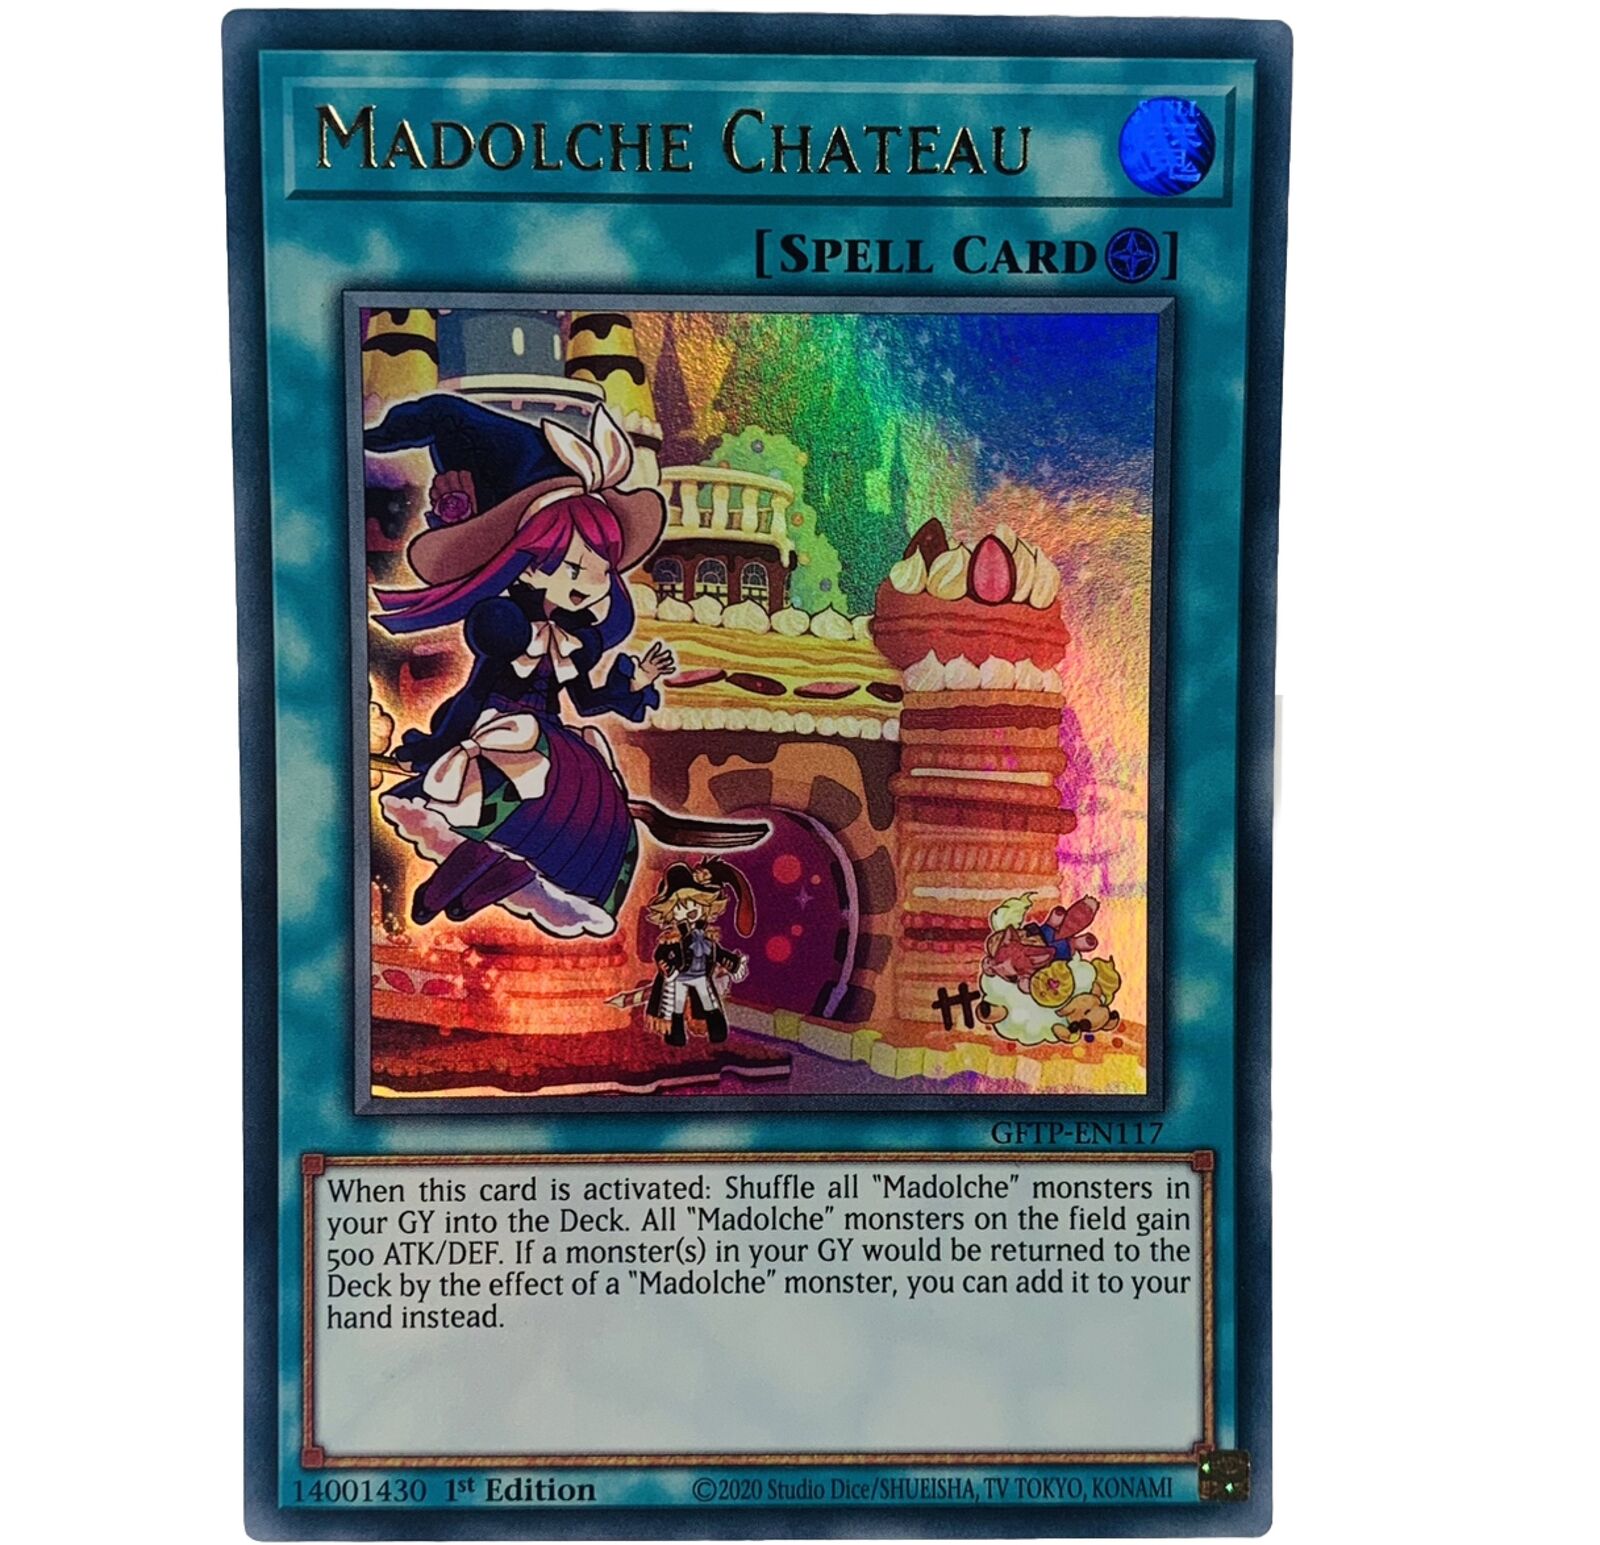 YUGIOH Madolche Chateau GFTP-EN117 Ultra Rare Card 1st Edition NM-MINT